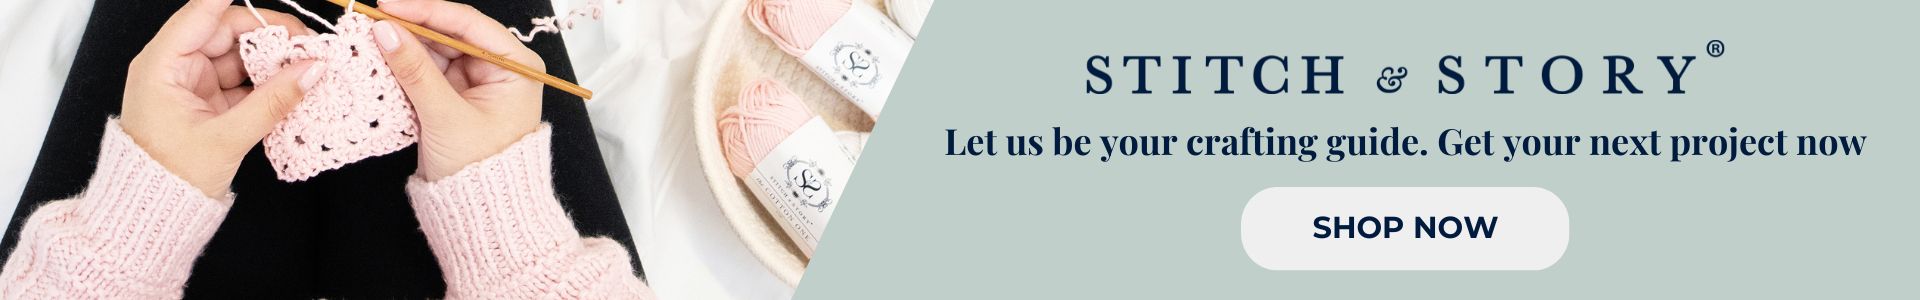 Let us be your guide. Get your next project now at Stitch & Story